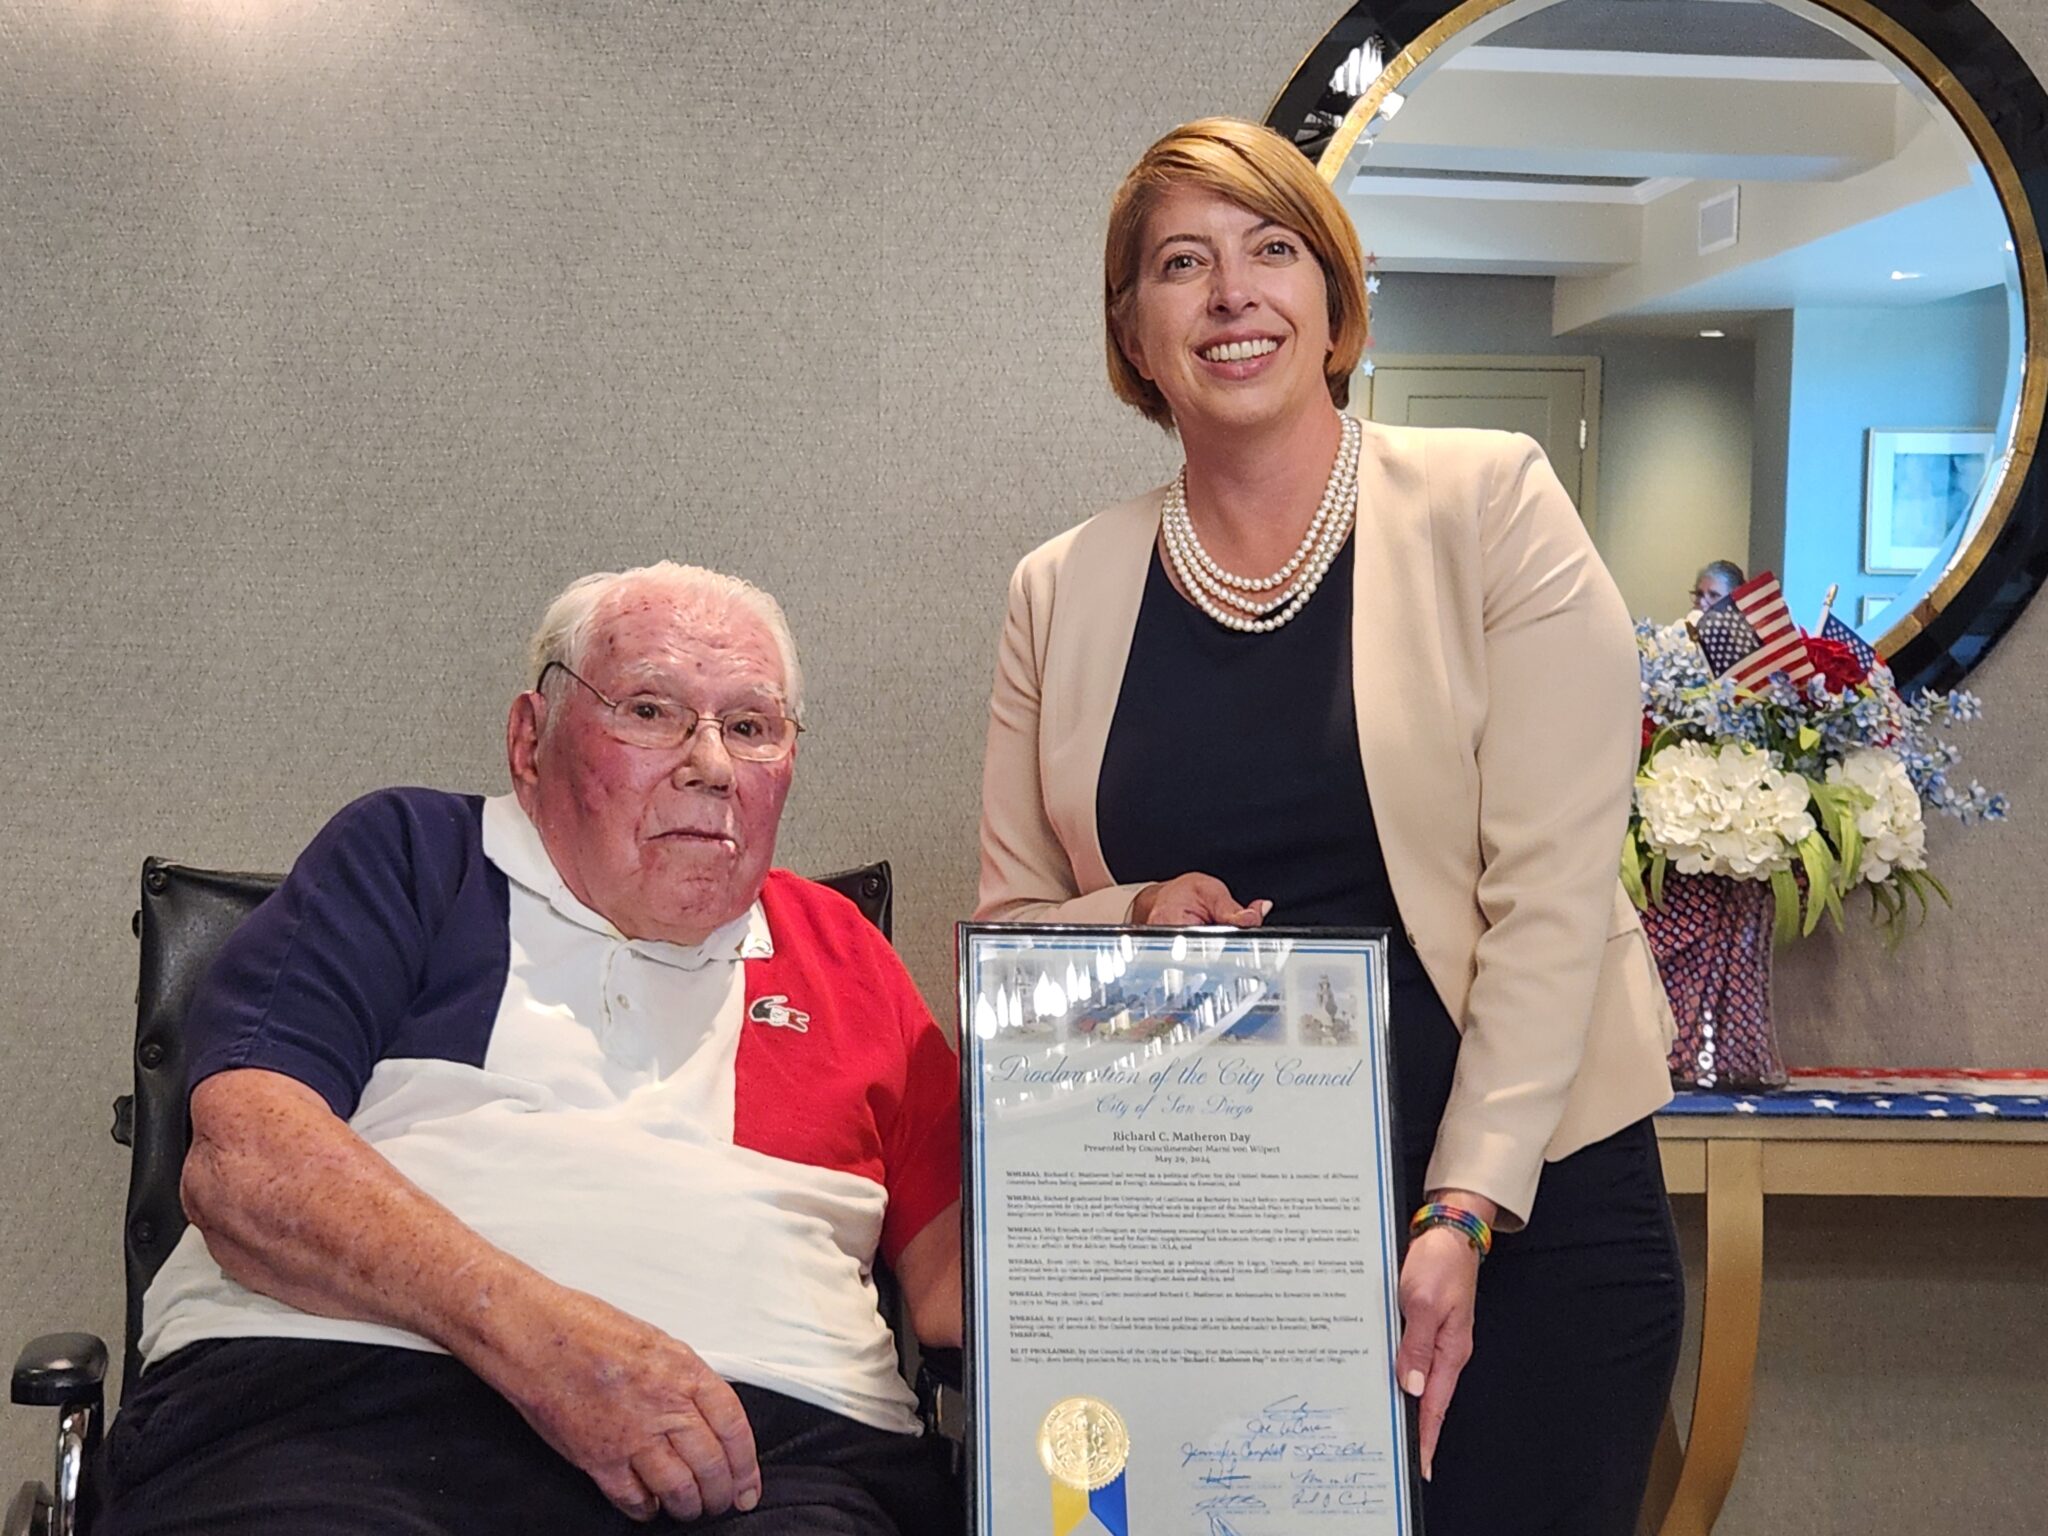 San Diego City Council Member Marni Von Wilpert presents a plaque commemorating May 29th as Richard C. Matheron Day, in honor of the former Ambassador and current Silvergate resident.